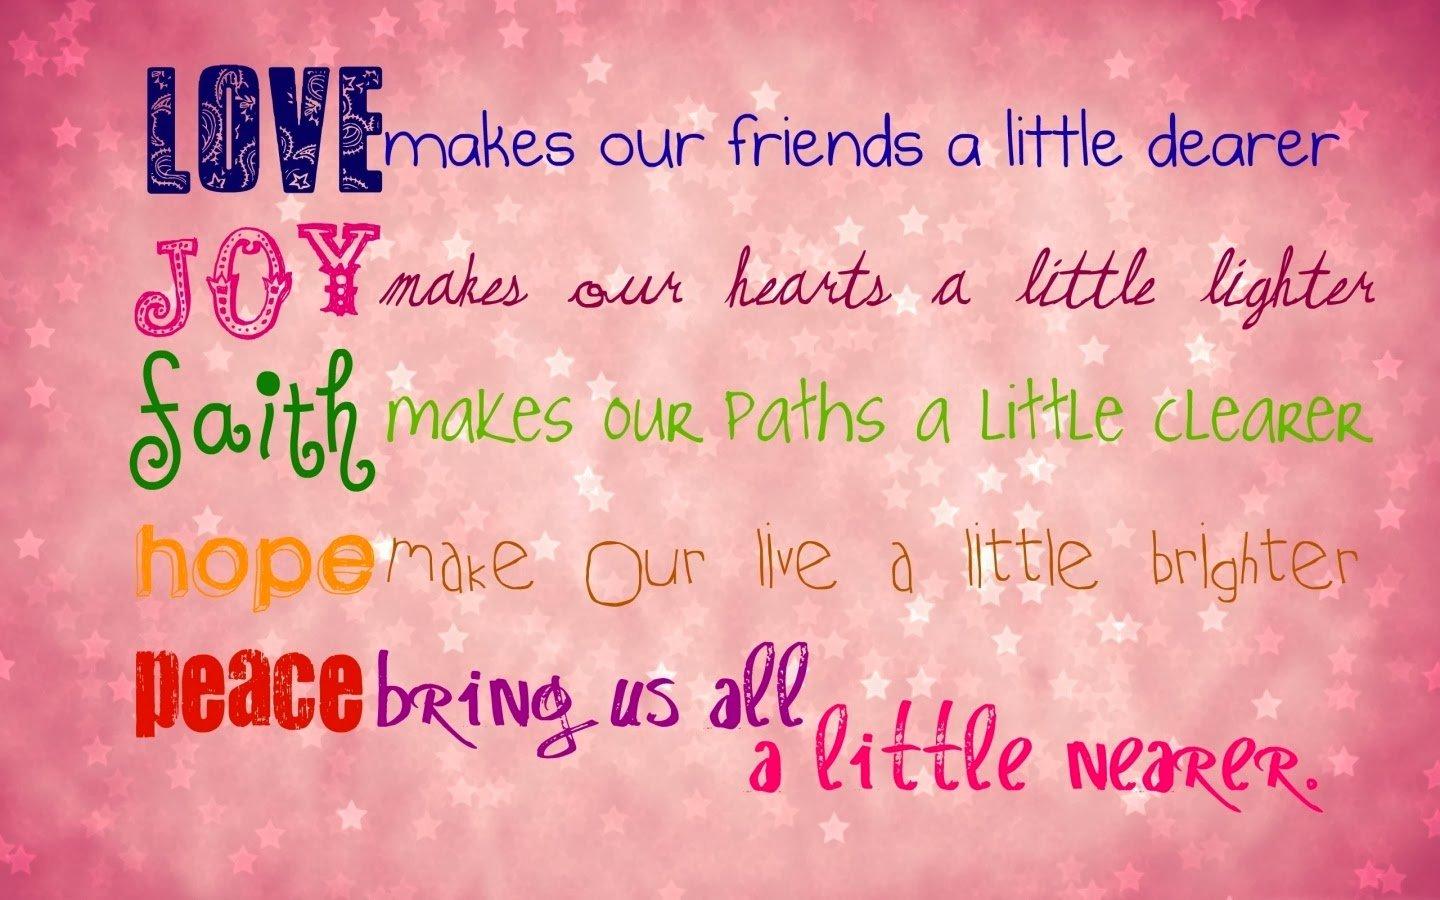 HD Cute Quotes & Sayings About Life and Love With Image